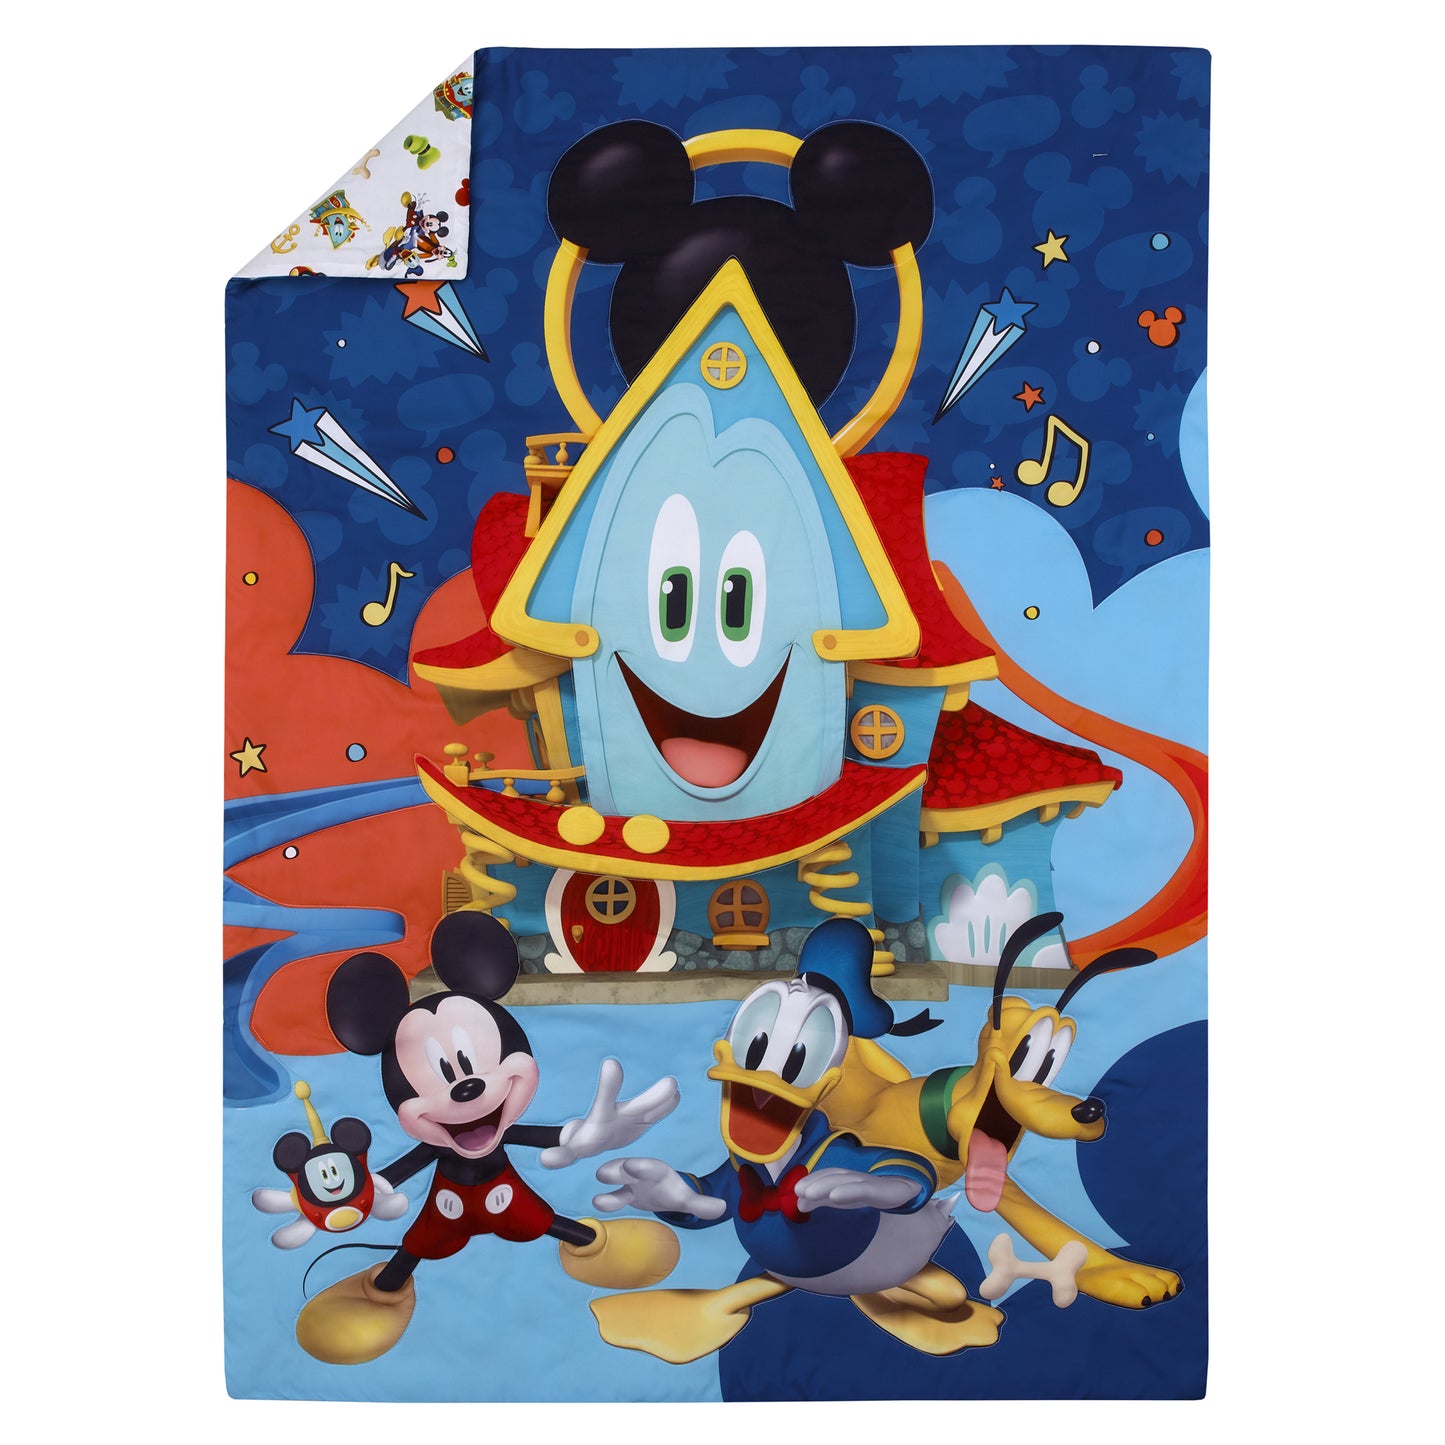 Disney Mickey Mouse Funhouse Crew Blue, Red and Yellow, Funny, Donald Duck, Goofy and Pluto 4 Piece Toddler Bed Set - Comforter, Fitted Bottom Sheet, Flat Top Sheet, and Reversible Pillowcase